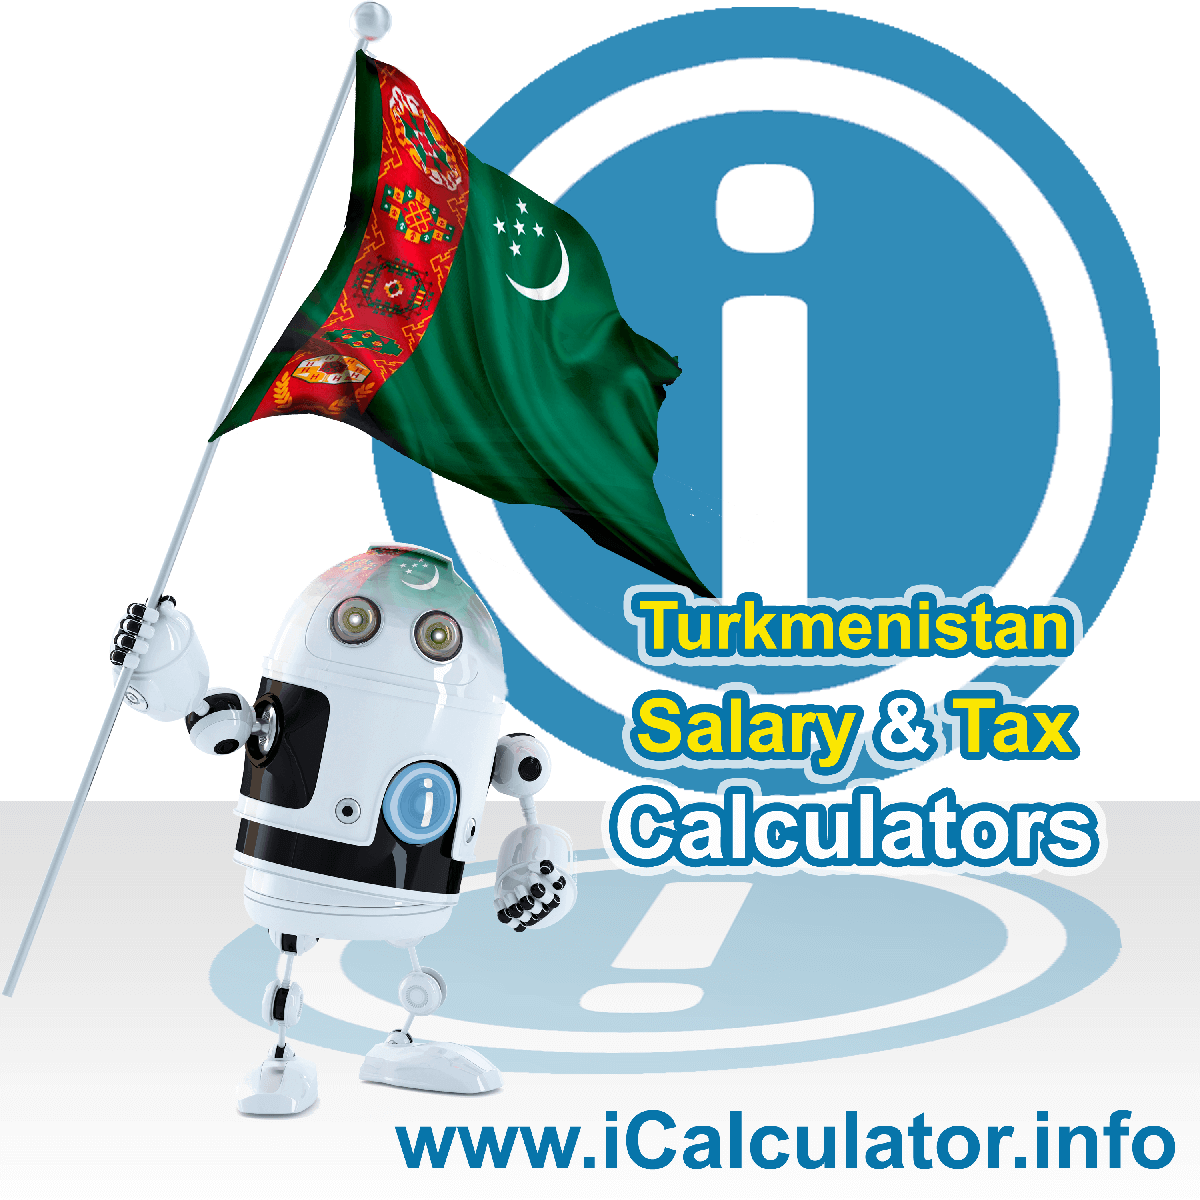 Turkmenistan Tax Calculator. This image shows the Turkmenistan flag and information relating to the tax formula for the Turkmenistan Salary Calculator